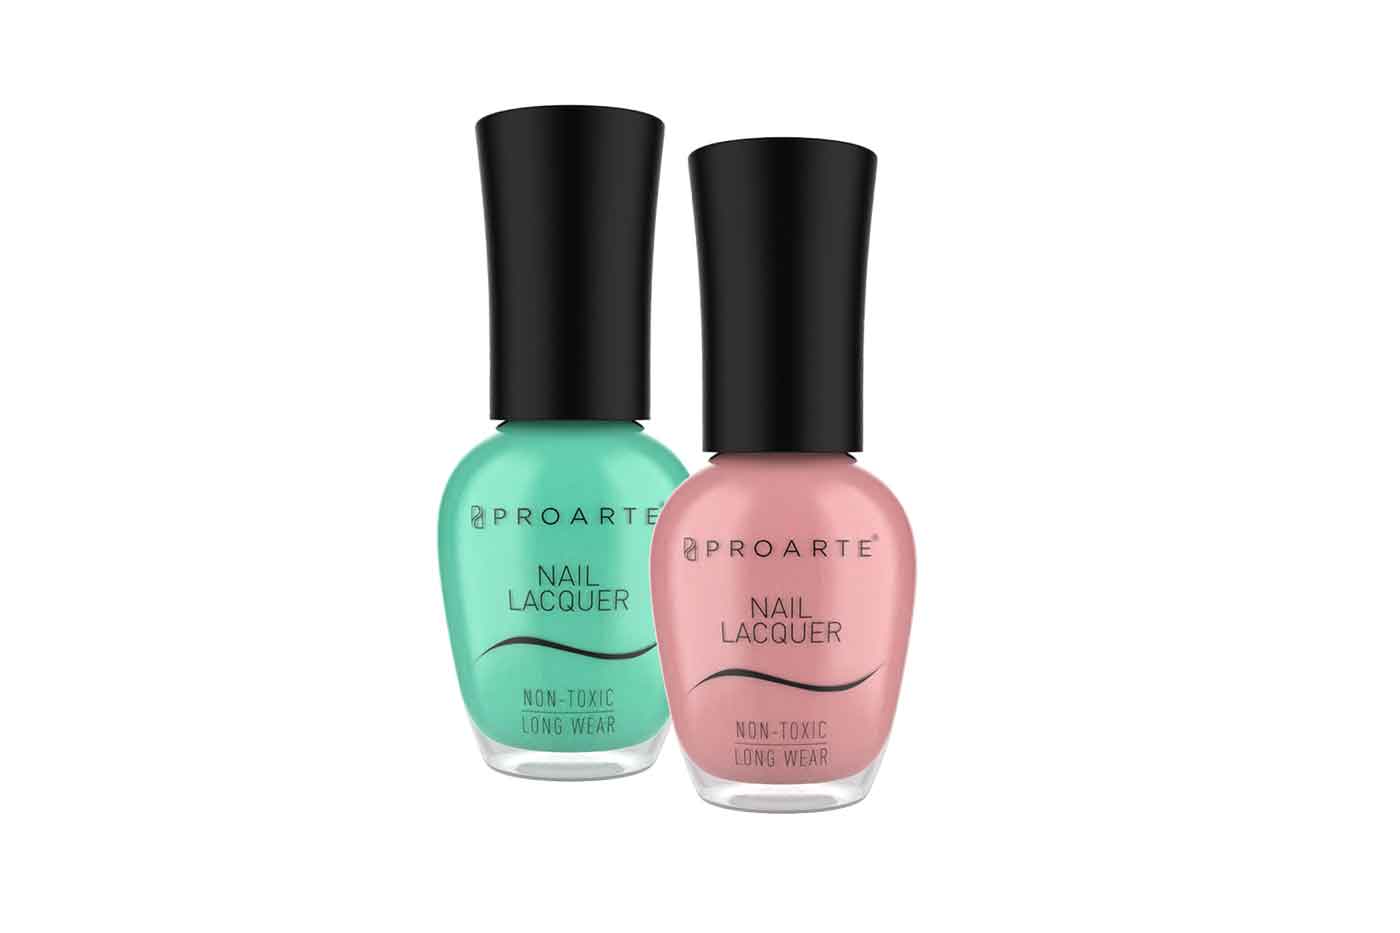 Chip resistant nails with Proarte Nail Lacquer